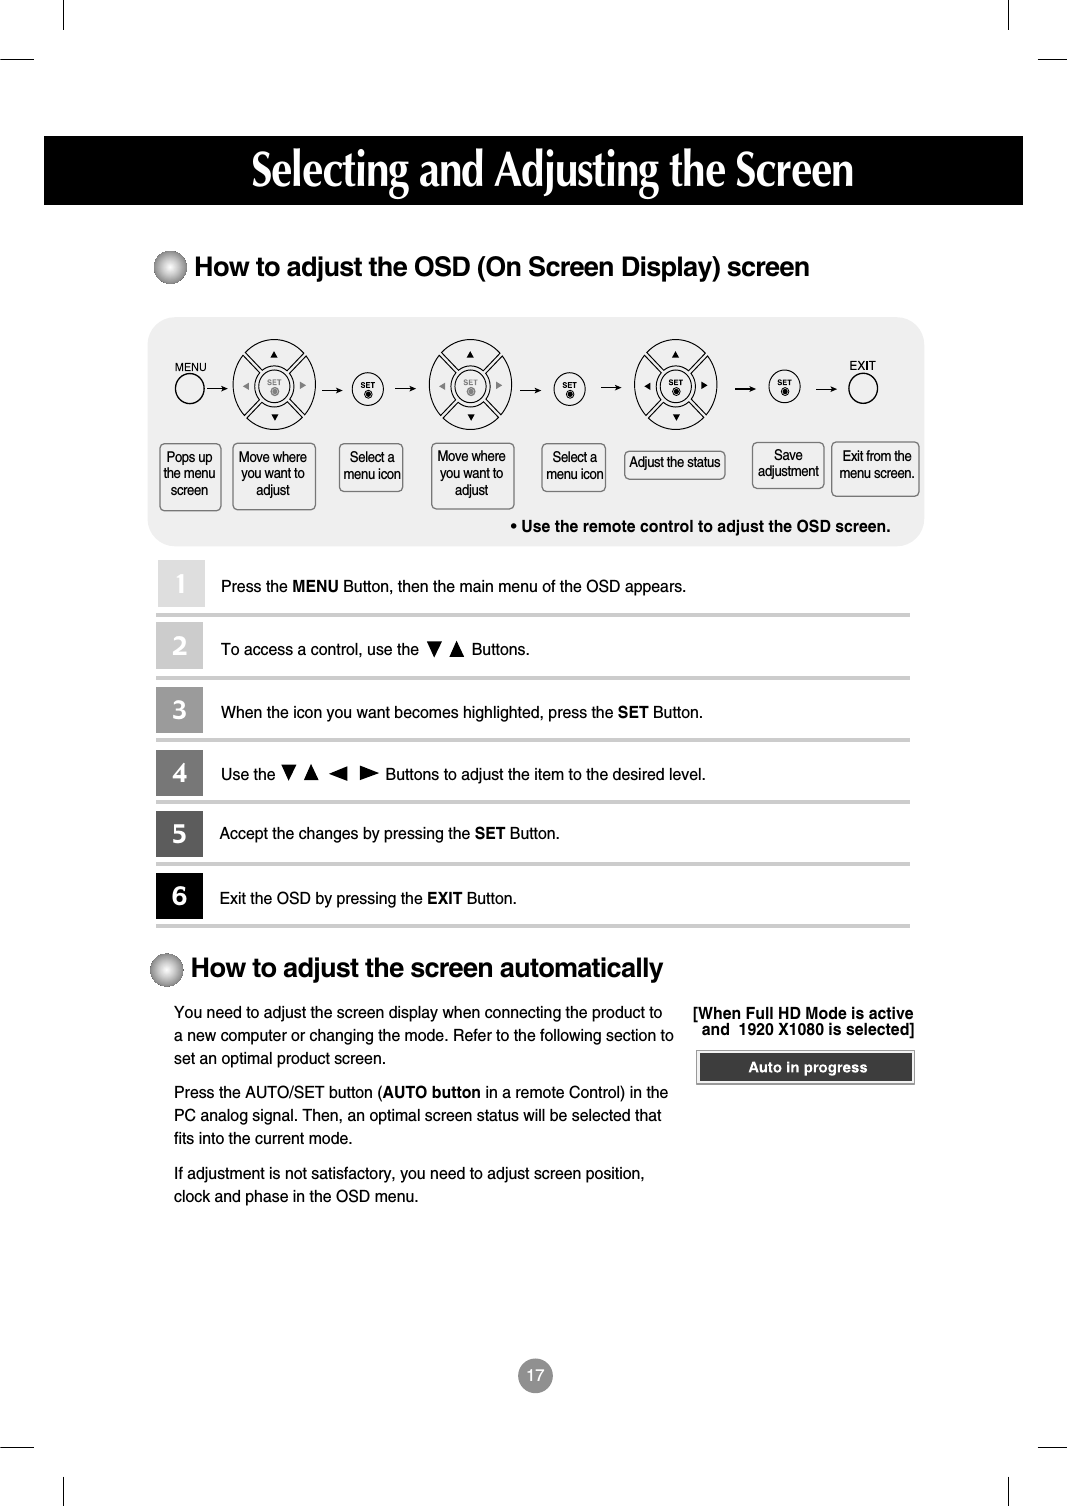 17How to adjust the OSD (On Screen Display) screen• Use the remote control to adjust the OSD screen.How to adjust the screen automaticallyYou need to adjust the screen display when connecting the product toa new computer or changing the mode. Refer to the following section toset an optimal product screen.Press the AUTO/SET button (AUTO button in a remote Control) in thePC analog signal. Then, an optimal screen status will be selected thatfits into the current mode.If adjustment is not satisfactory, you need to adjust screen position,clock and phase in the OSD menu.Press the MENU Button, then the main menu of the OSD appears.To access a control, use the            Buttons. When the icon you want becomes highlighted, press the SET Button.Use the                         Buttons to adjust the item to the desired level.Accept the changes by pressing the SET Button.Exit the OSD by pressing the EXIT Button.123456Pops upthe menuscreenMove whereyou want toadjustMove whereyou want toadjustSelect amenu iconSelect amenu icon Adjust the status SaveadjustmentExit from themenu screen.Selecting and Adjusting the Screen[When Full HD Mode is activeand  1920 X1080 is selected]